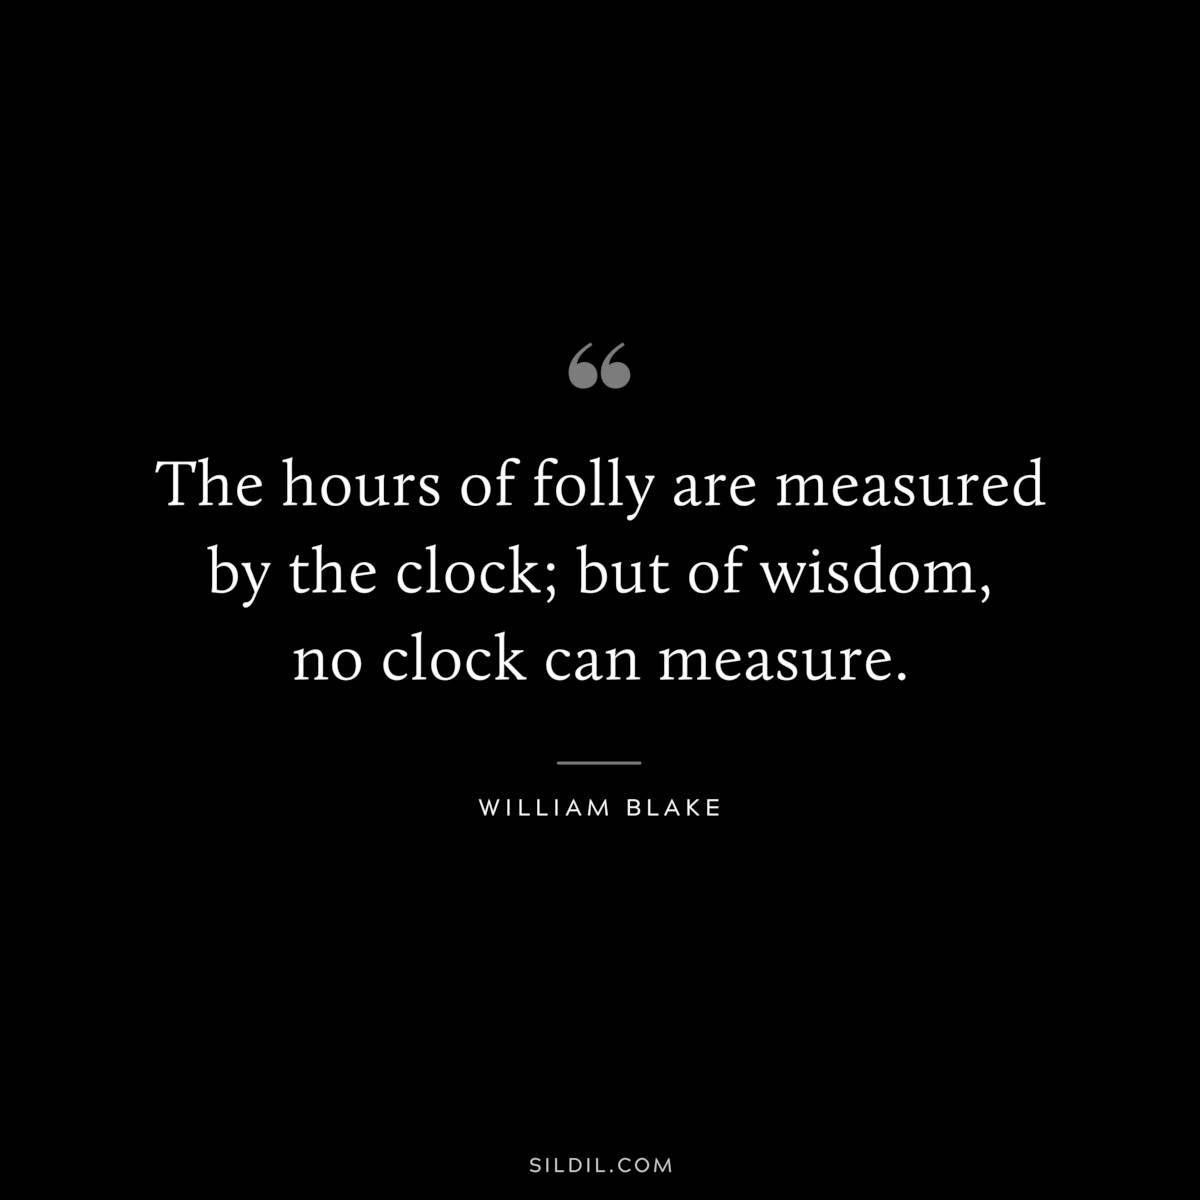 The hours of folly are measured by the clock; but of wisdom, no clock can measure. ― William Blake